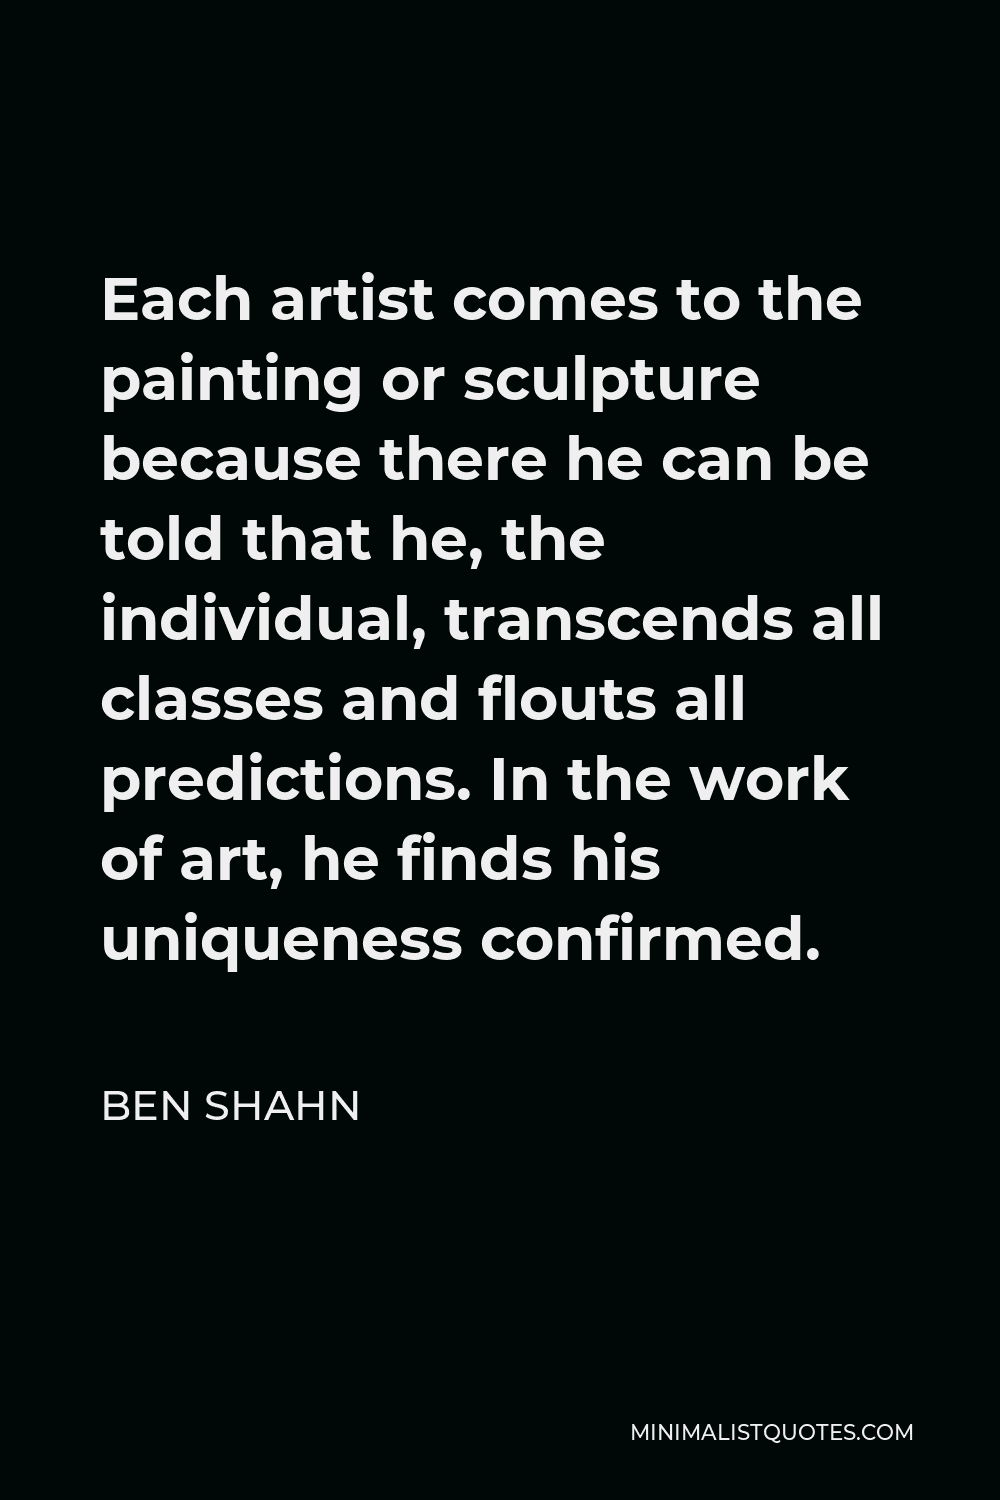 Ben Shahn Quote - Each artist comes to the painting or sculpture because there he can be told that he, the individual, transcends all classes and flouts all predictions. In the work of art, he finds his uniqueness confirmed.